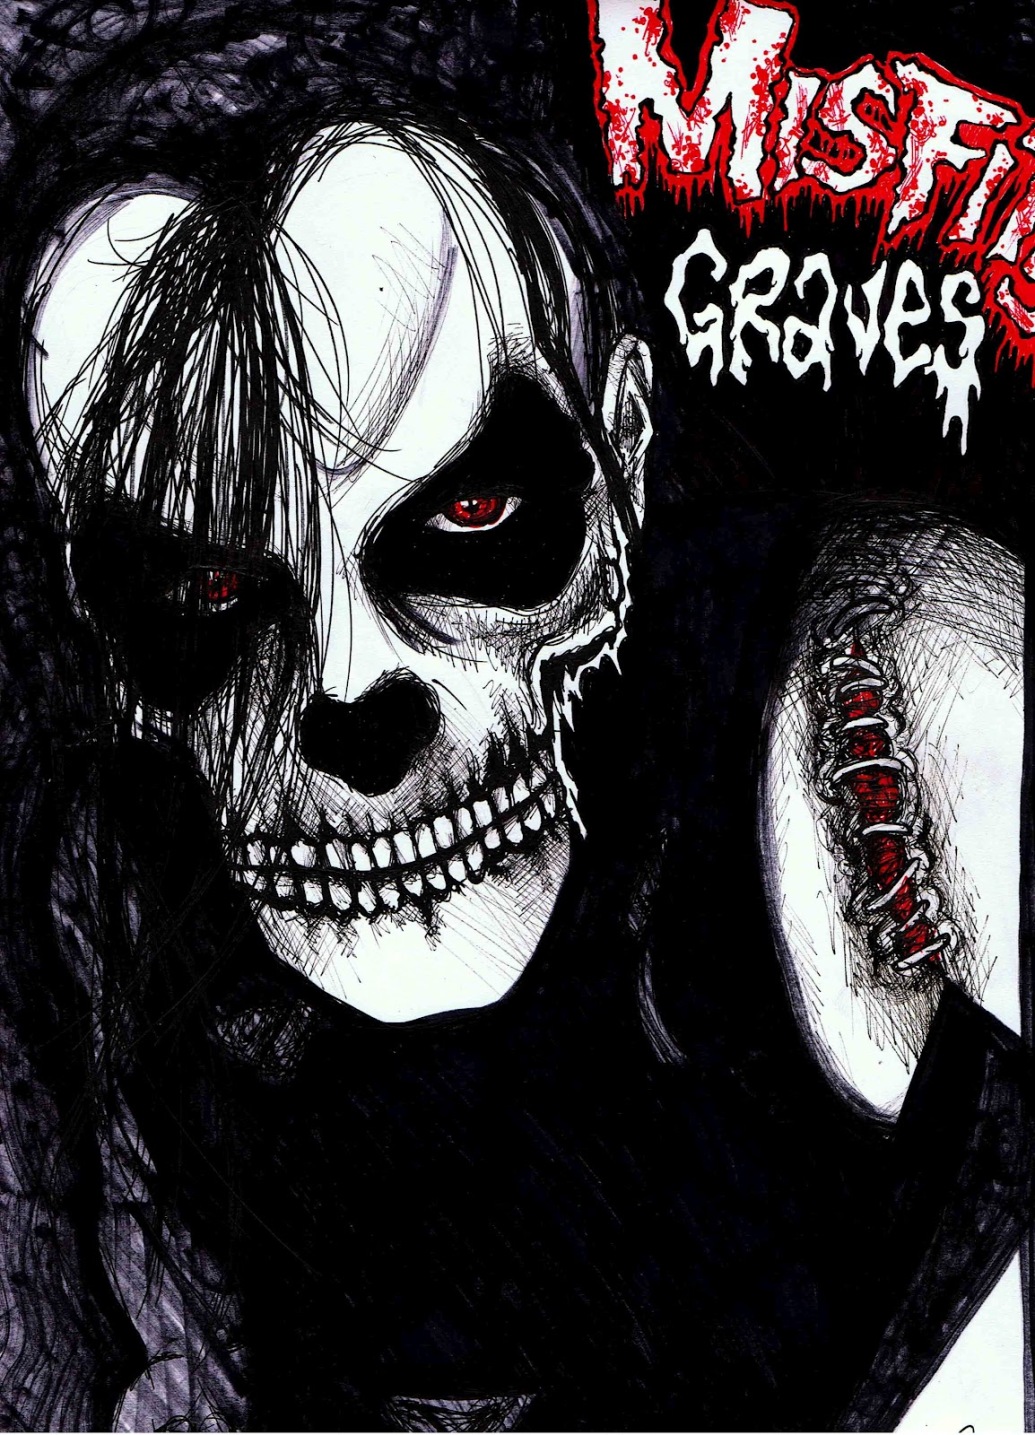 Michale_Graves___Misfits_by_maga_a7x